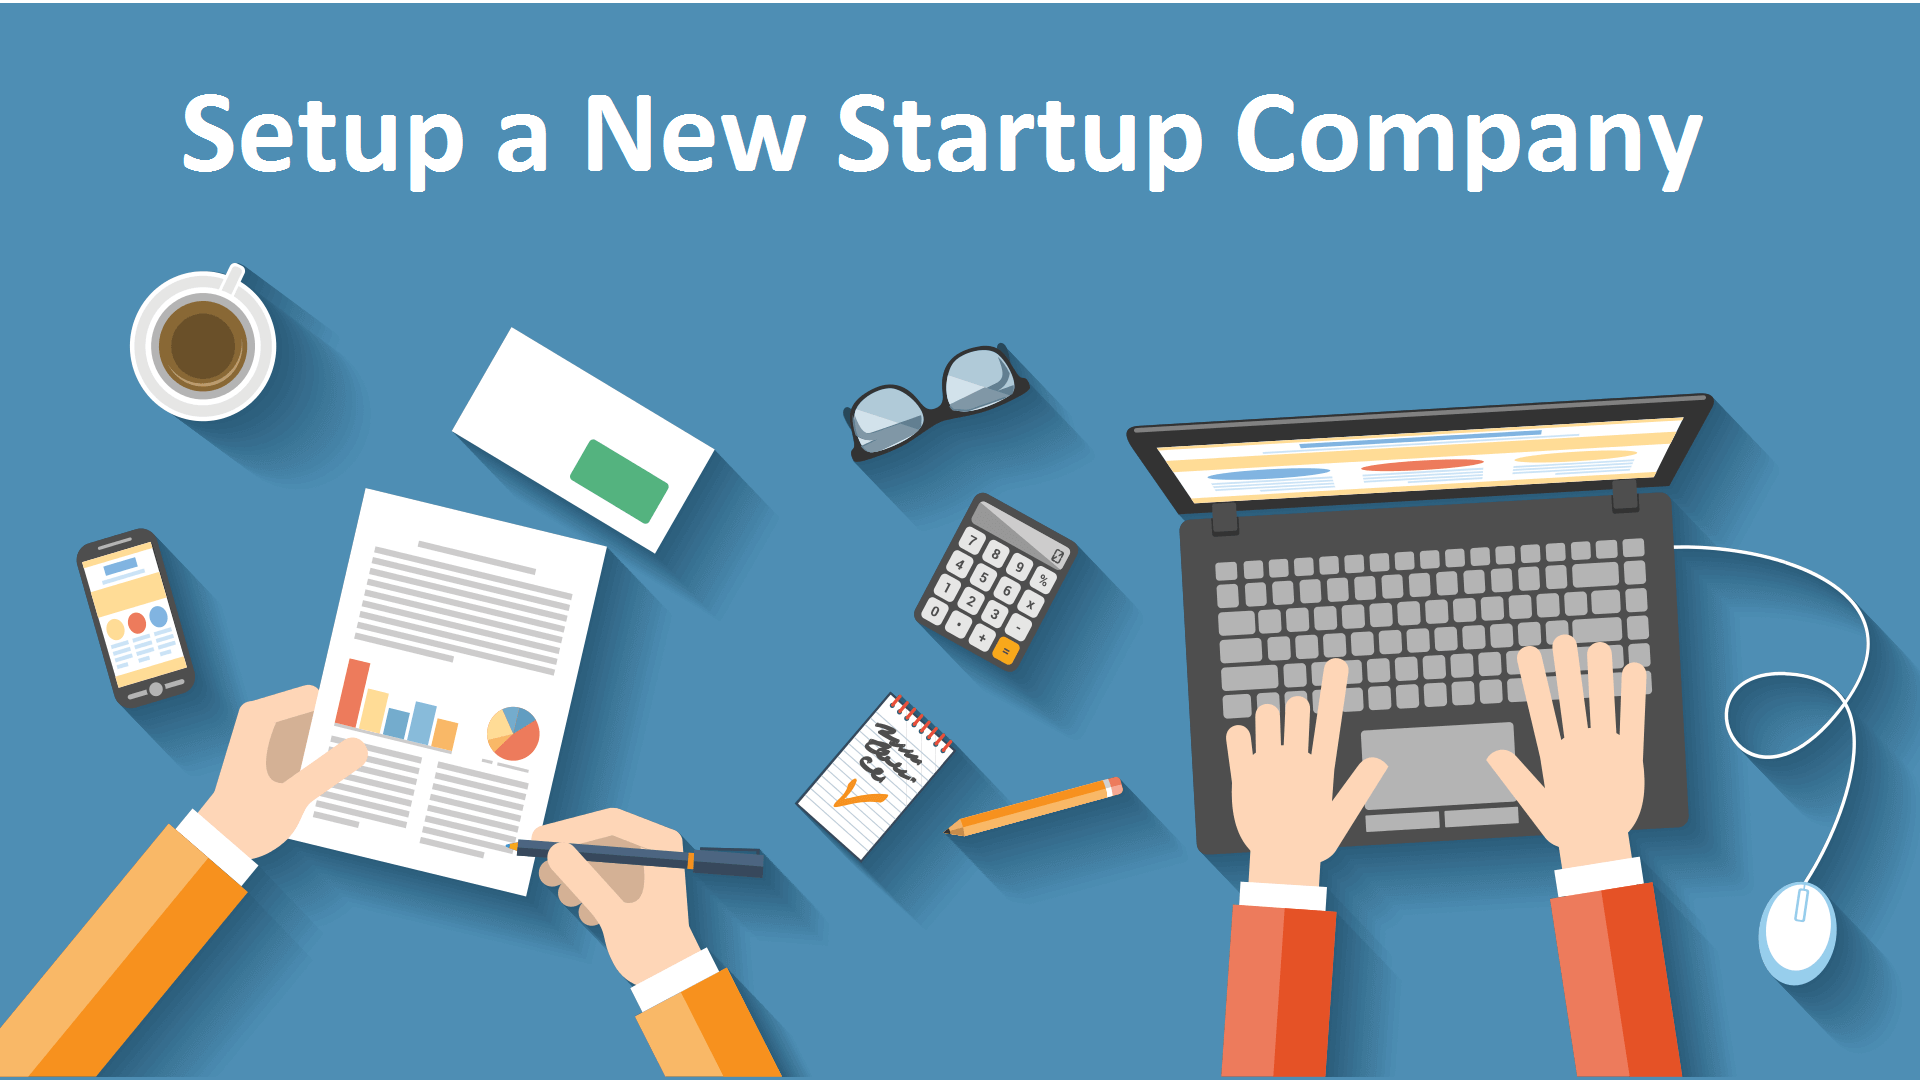 What are the Steps to Setup a New Startup Company in Bangalore?